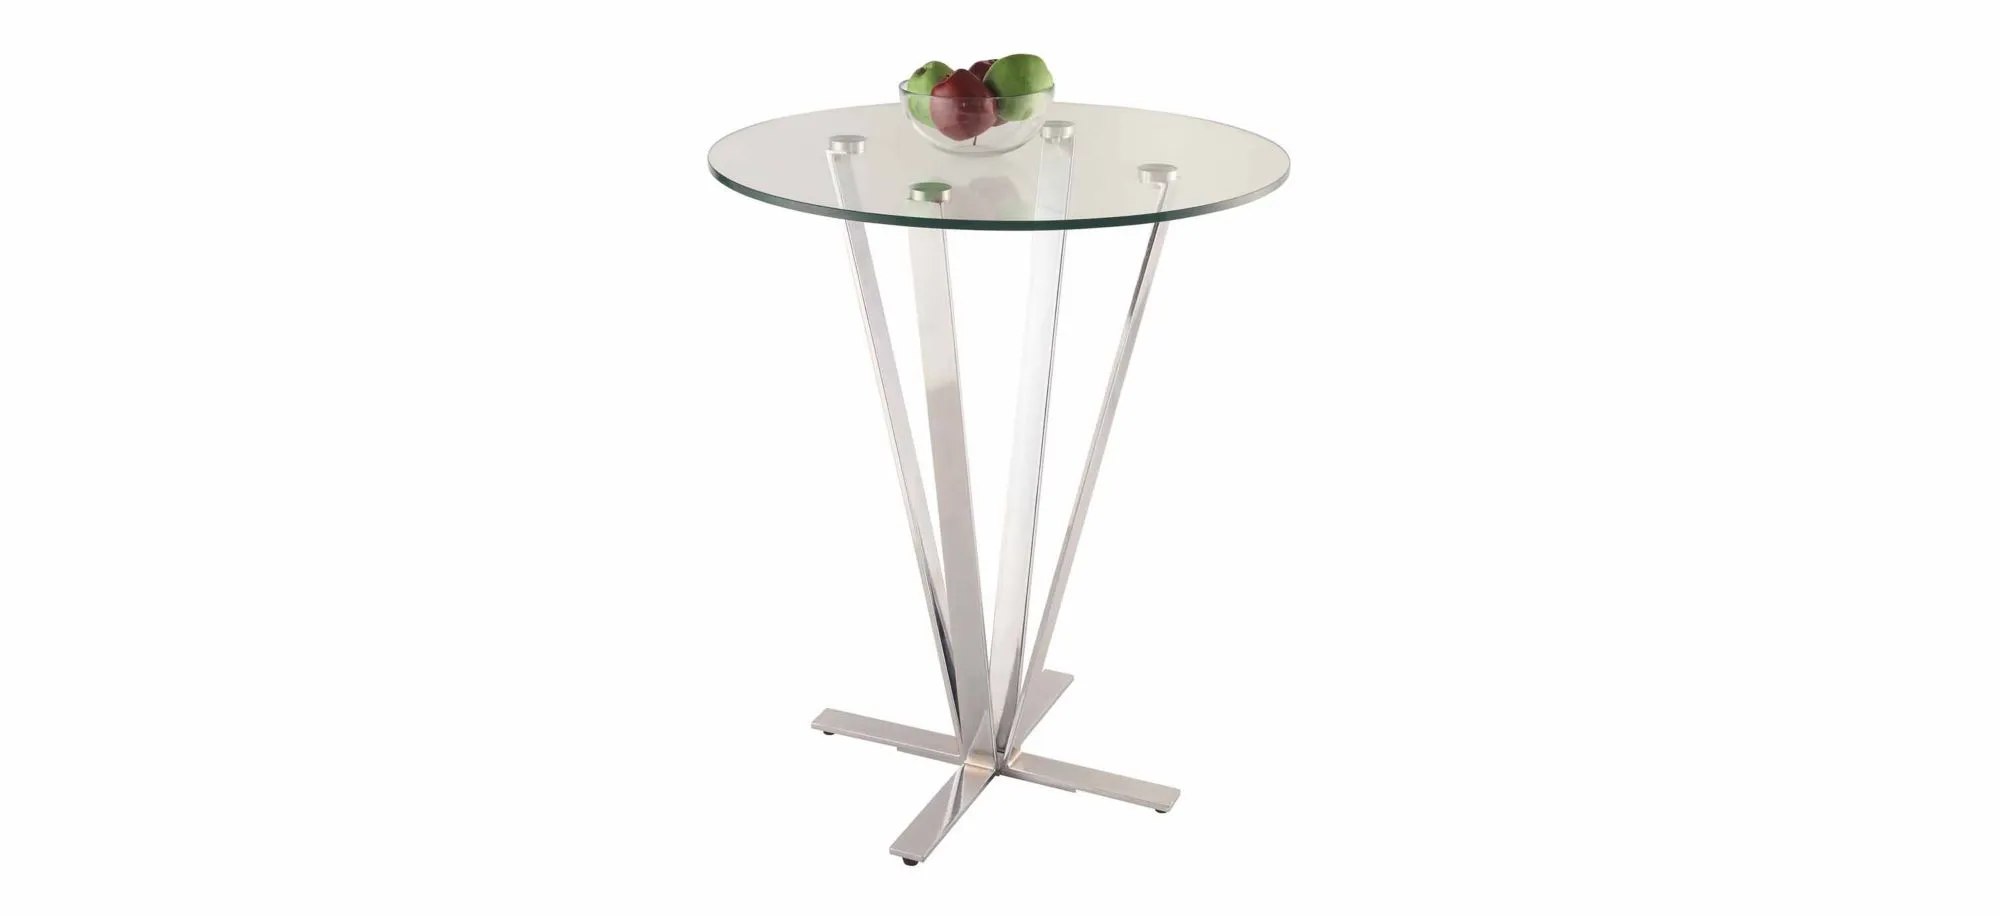 Cortlan Counter-Height Table in Silver by Chintaly Imports